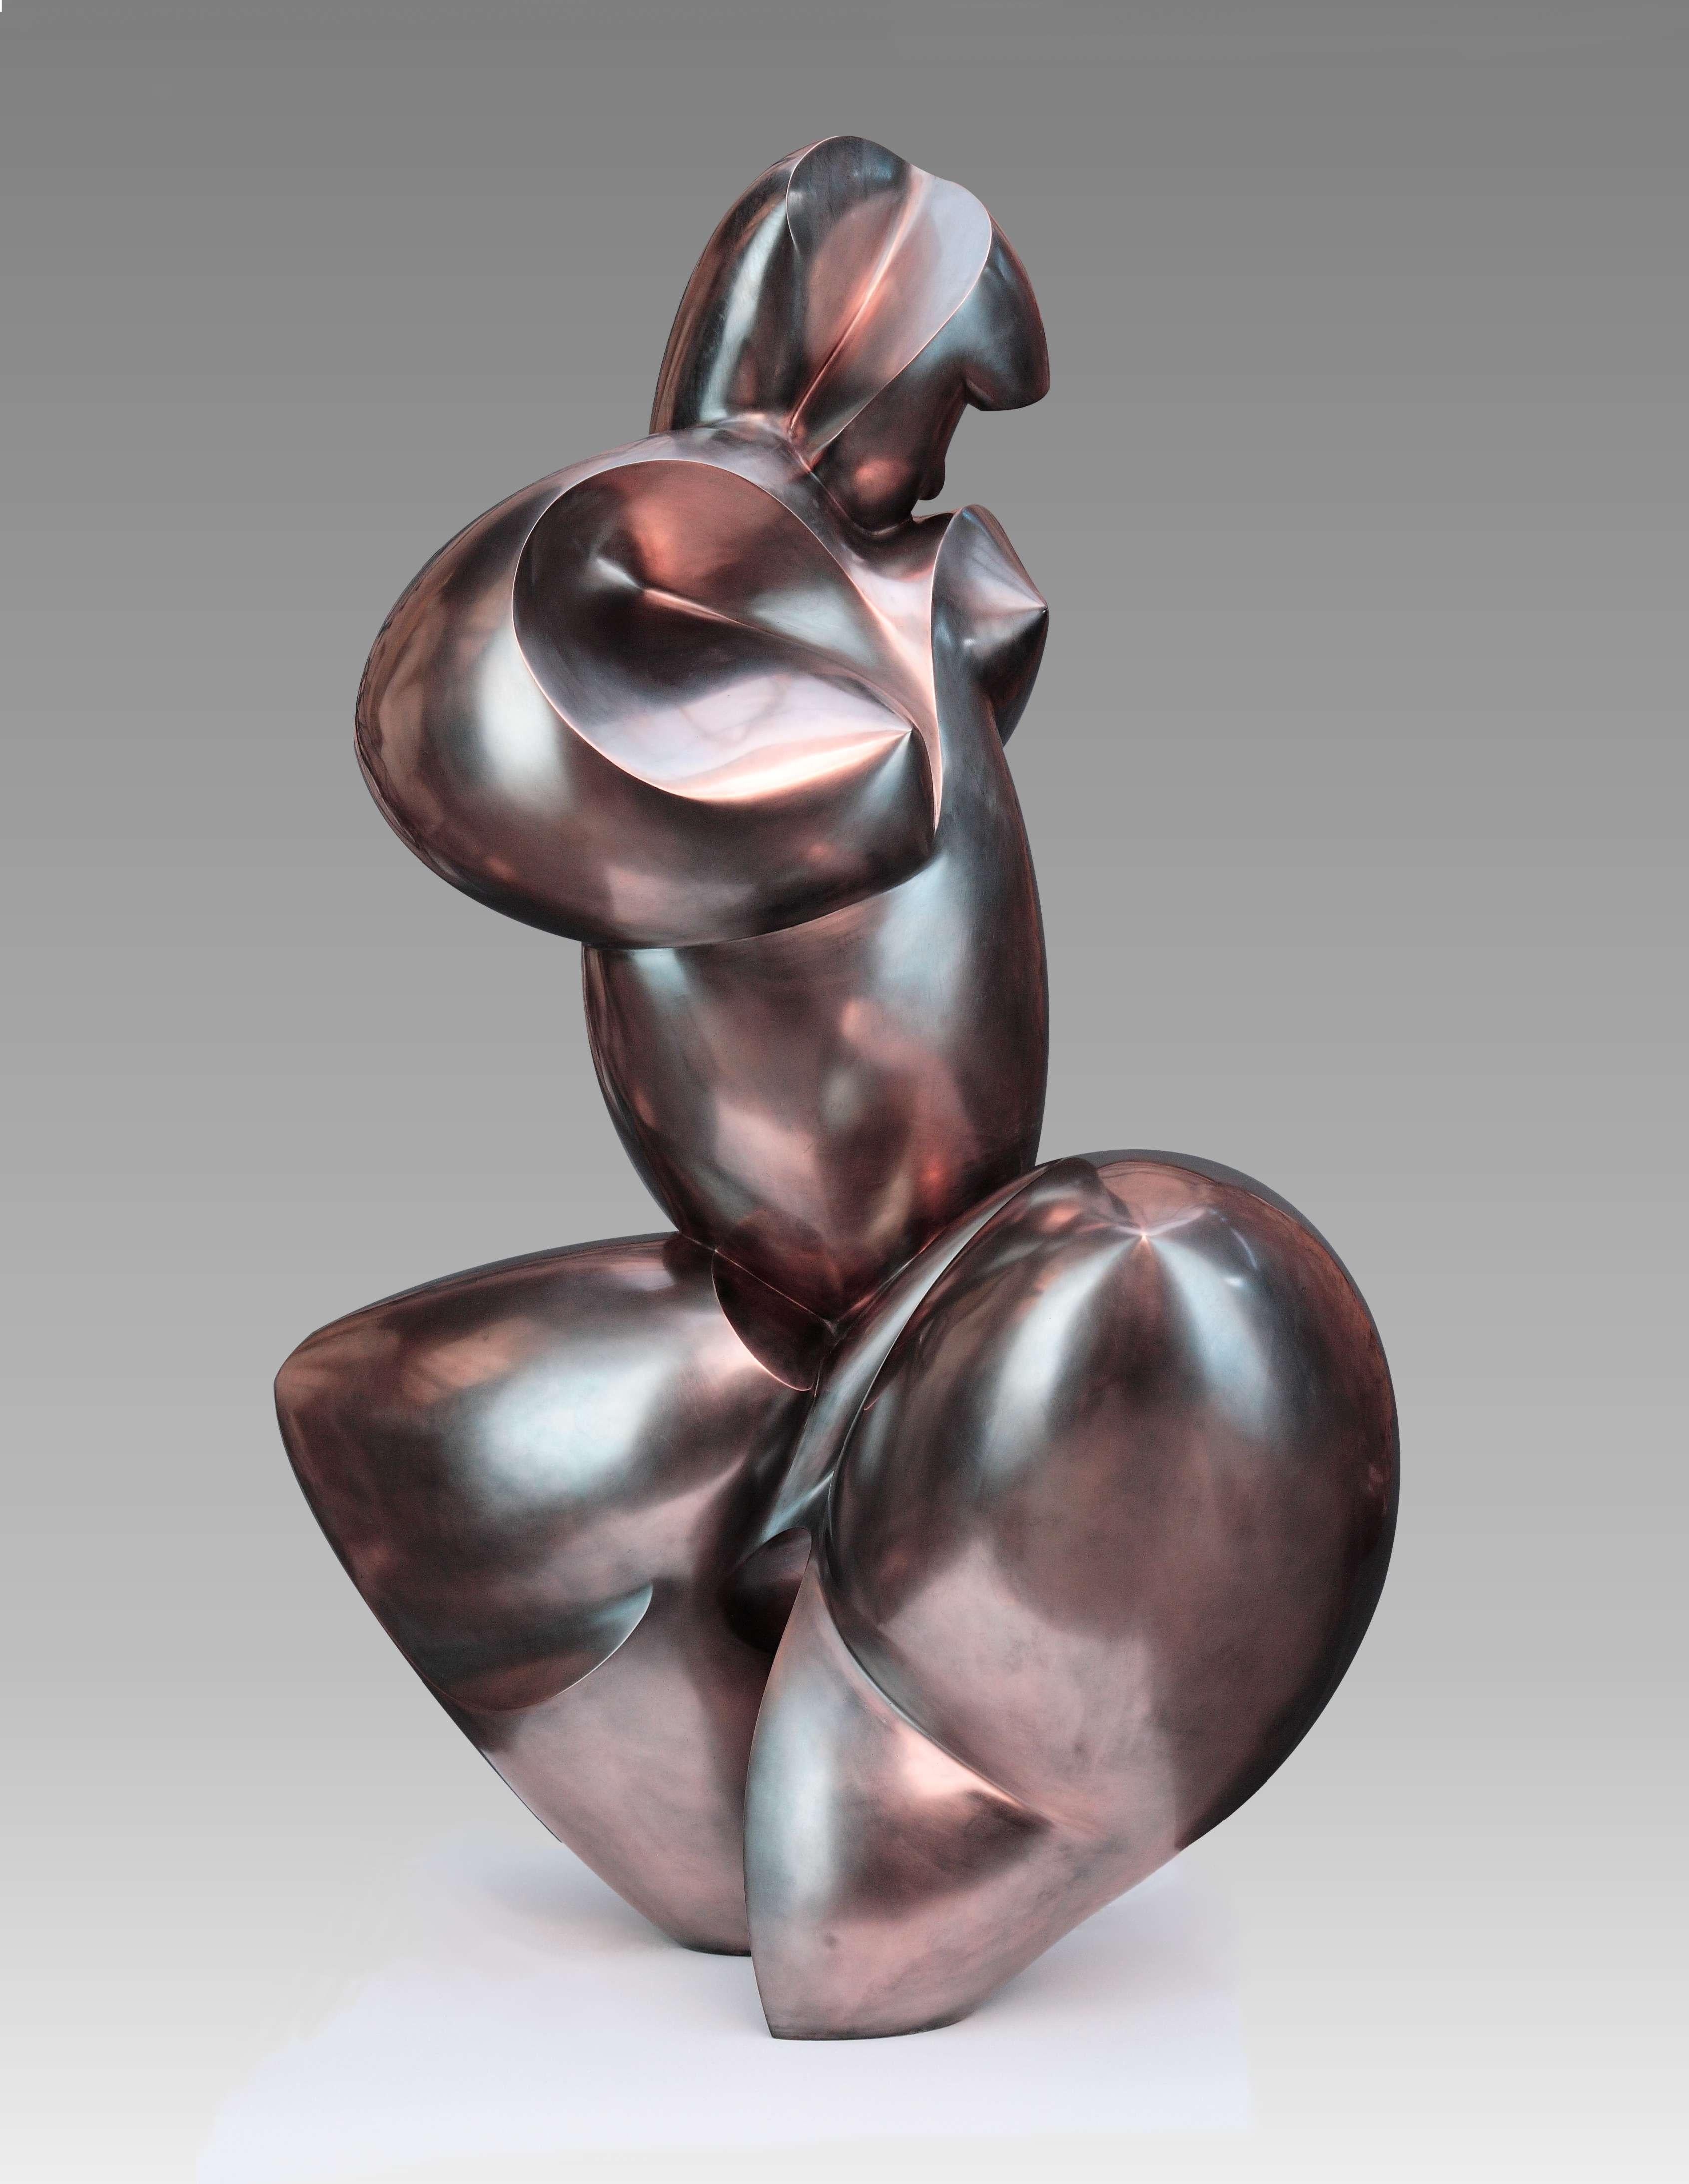 Pollès - Bronze Sculpture - Yterbine
Bronze
4/4
Created in 1998, casted in 2003
120 x 85 x 70 cm
Signed and Numbered

BIOGRAPHY
Pollès was born in Paris in 1945
Like Leonard de Vinci in an anatomical search of perfection, of representation of